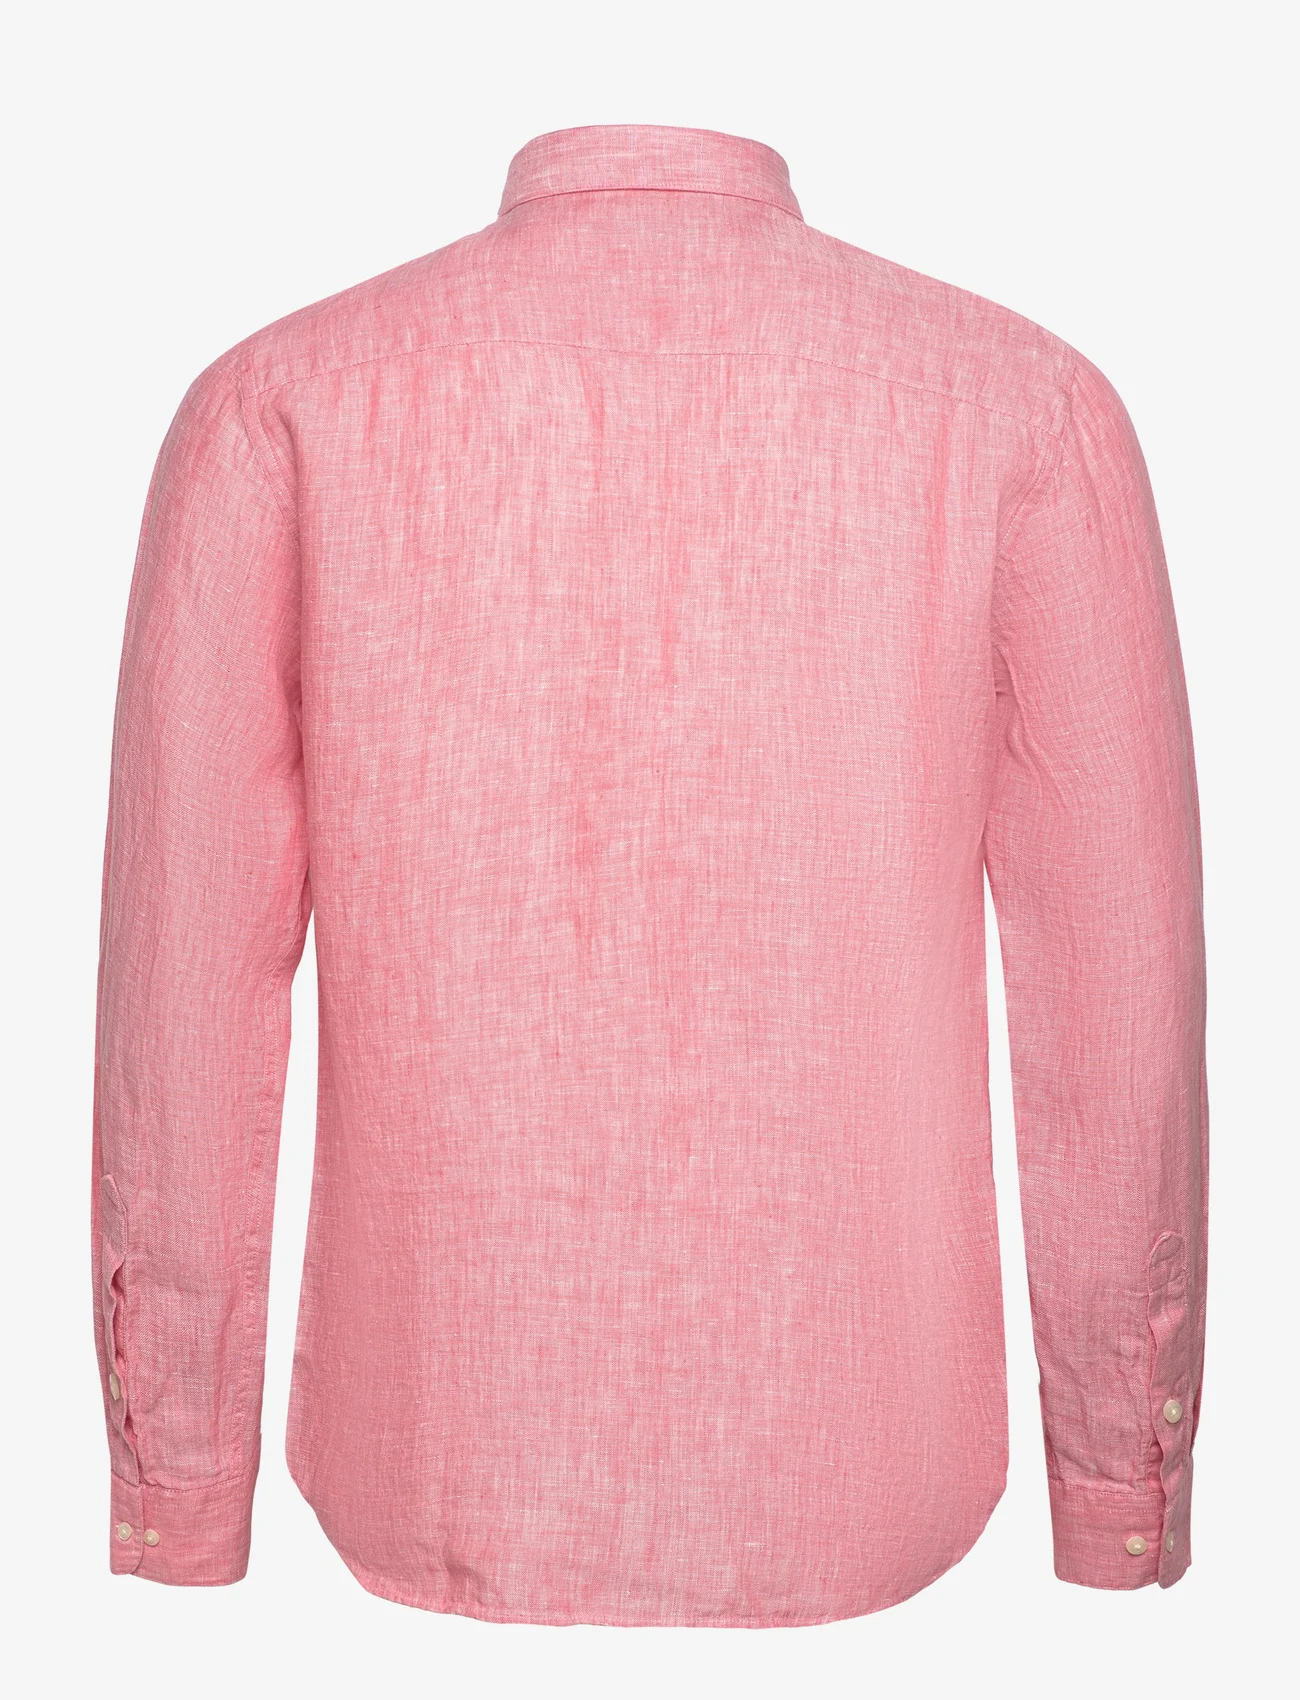 Matinique - MAmarc short - linen shirts - faded rose - 1